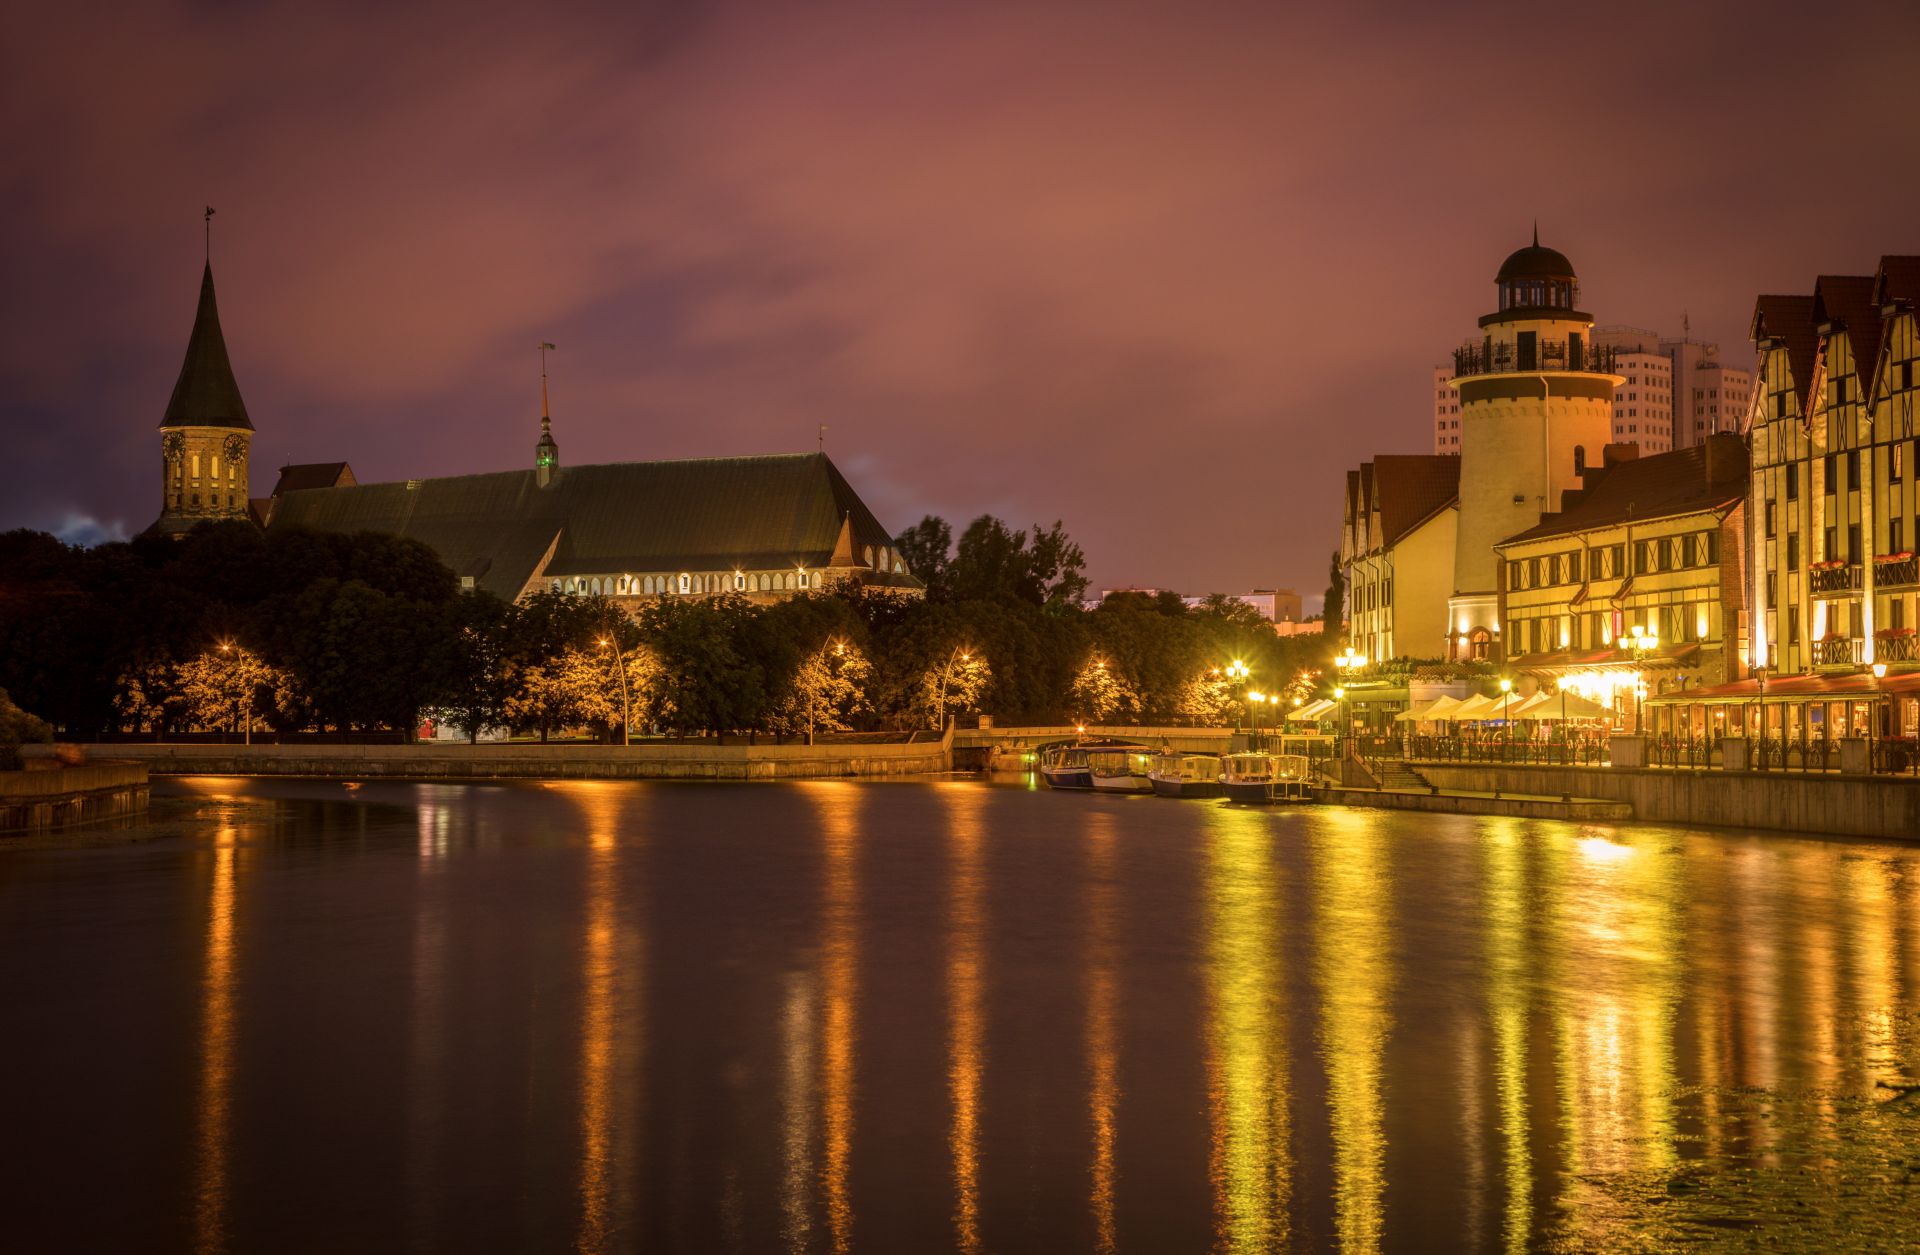 Konigsberg Cathedral and the Pregolya River are seen in this nighttime shot in Kaliningrad.